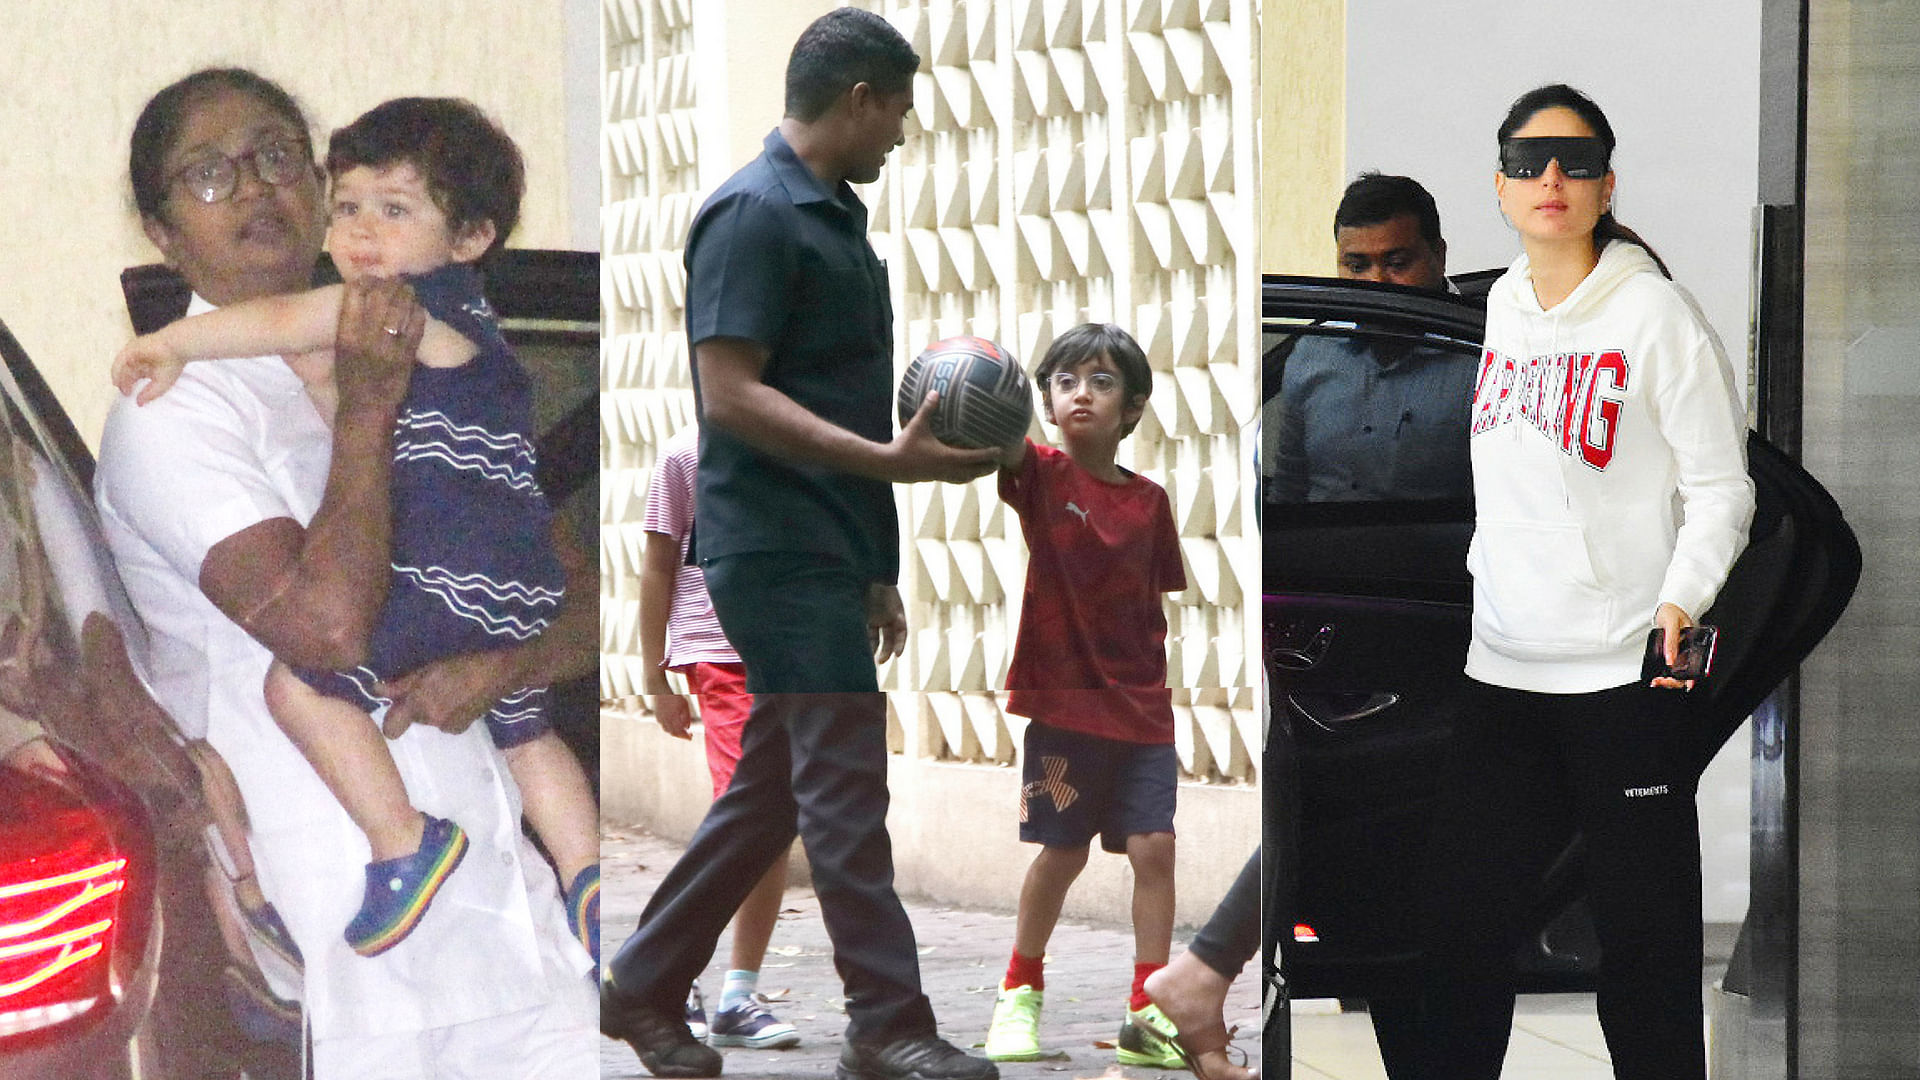 From Taimur Ali Khan to Azad Khan this is what the star kids are up to.